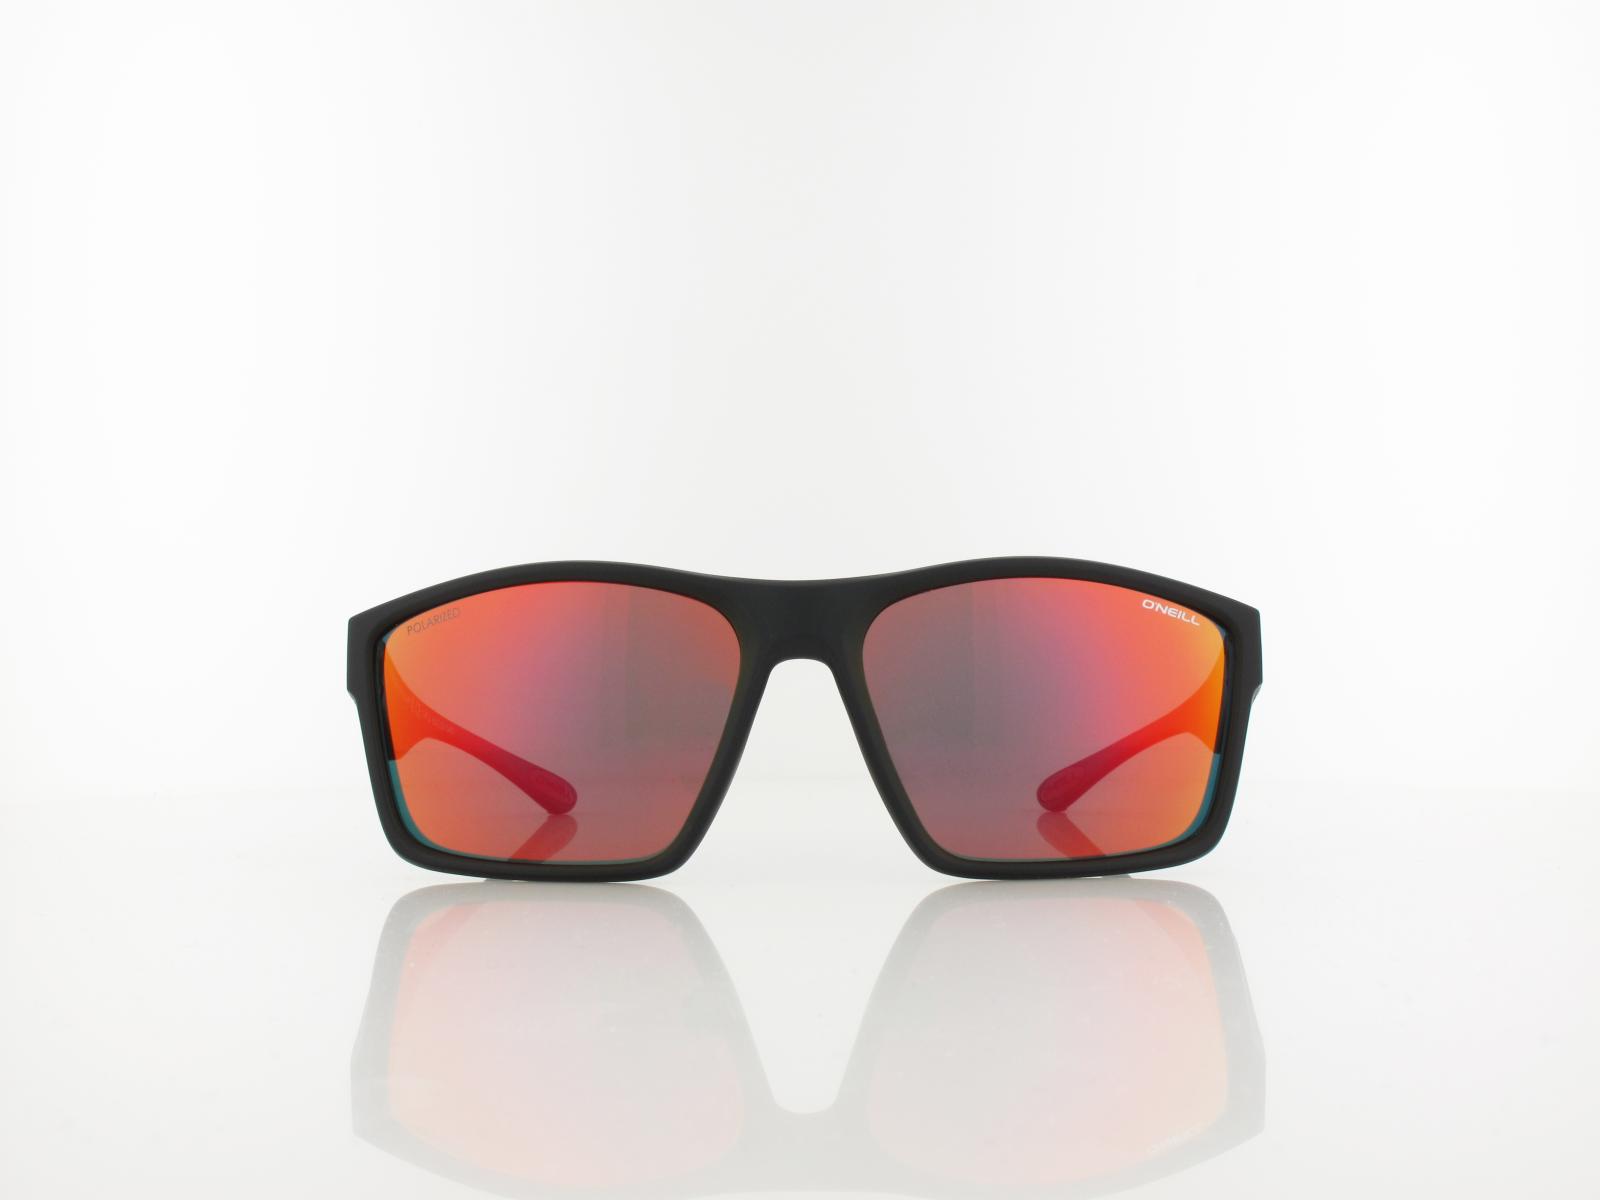 O'Neill | ONS 9024 2.0 104P 60 | matte black red / red mirror polarized